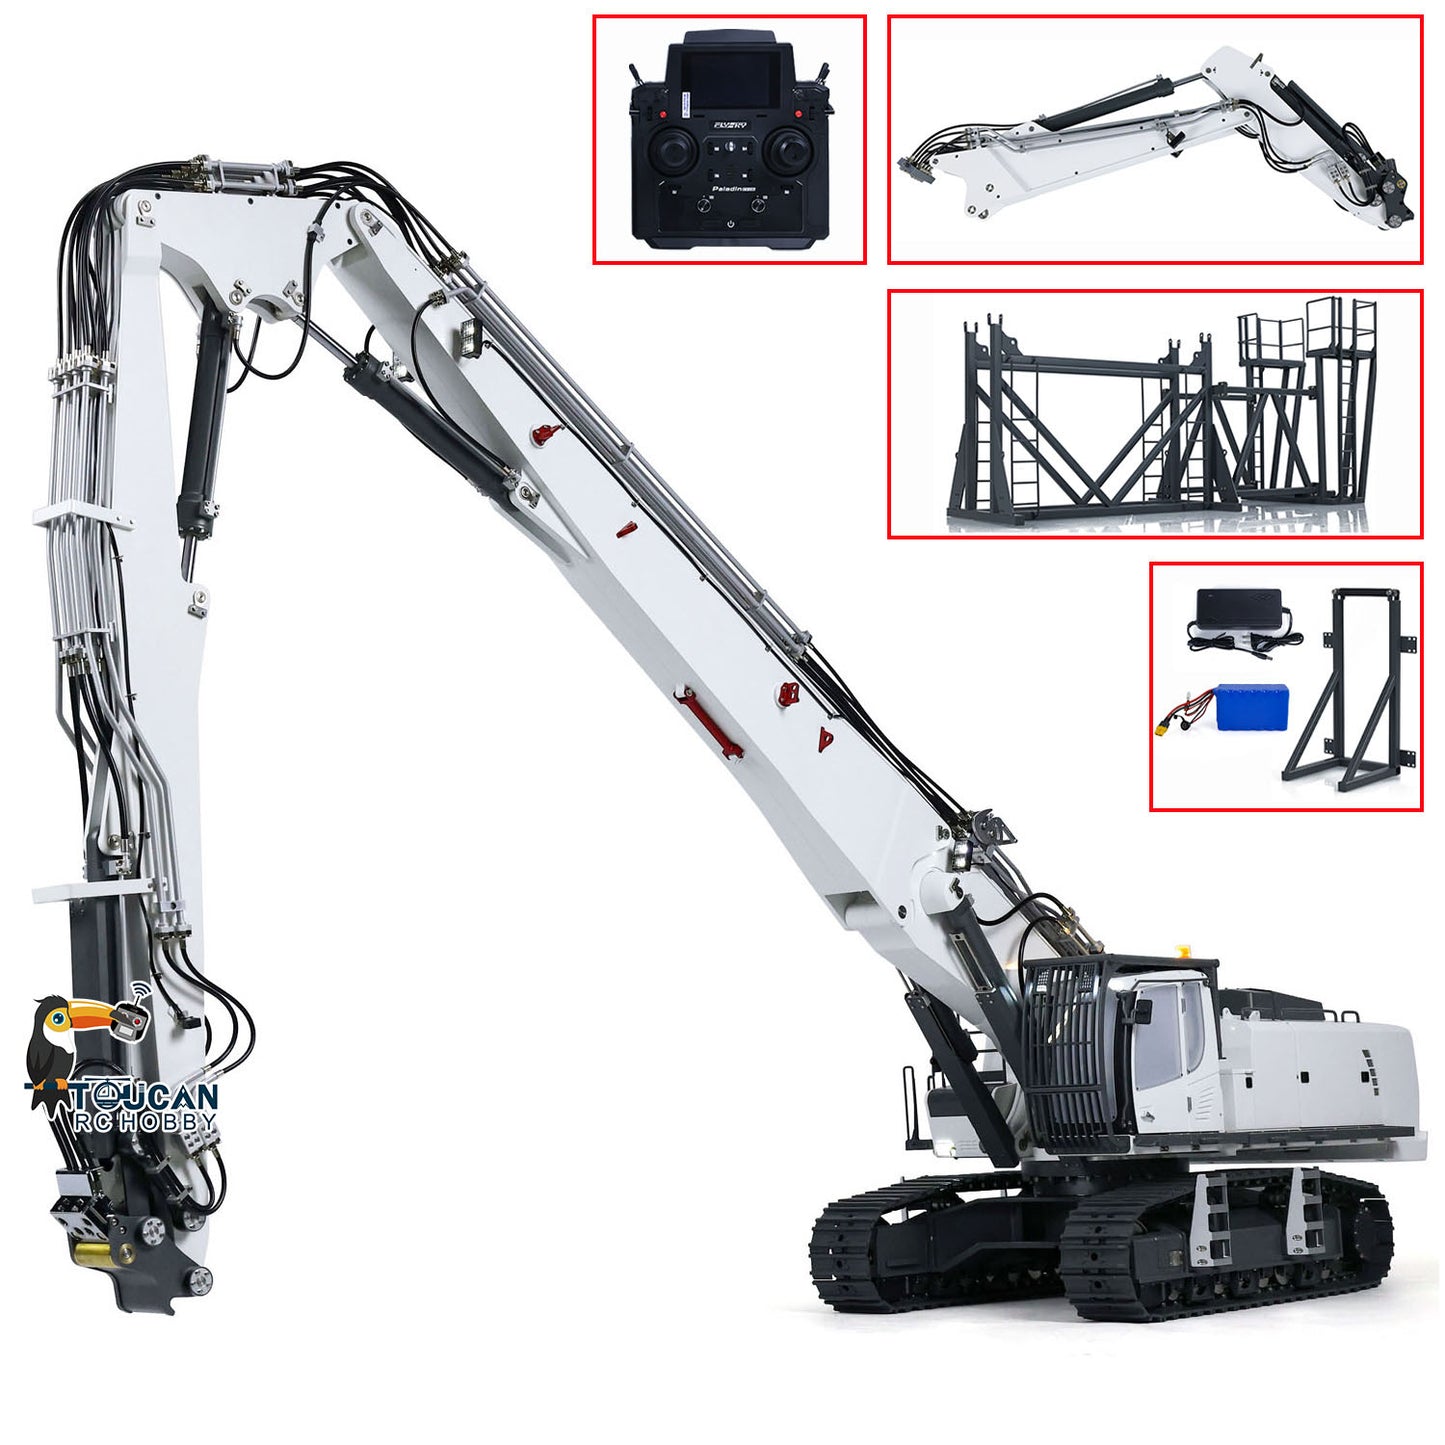 IN STOCK CUT 1/14 K970-300 RC Hydraulic Excavators Radio Controlled Demolition Machine With Replaceable 2-arm RTR Painted Version